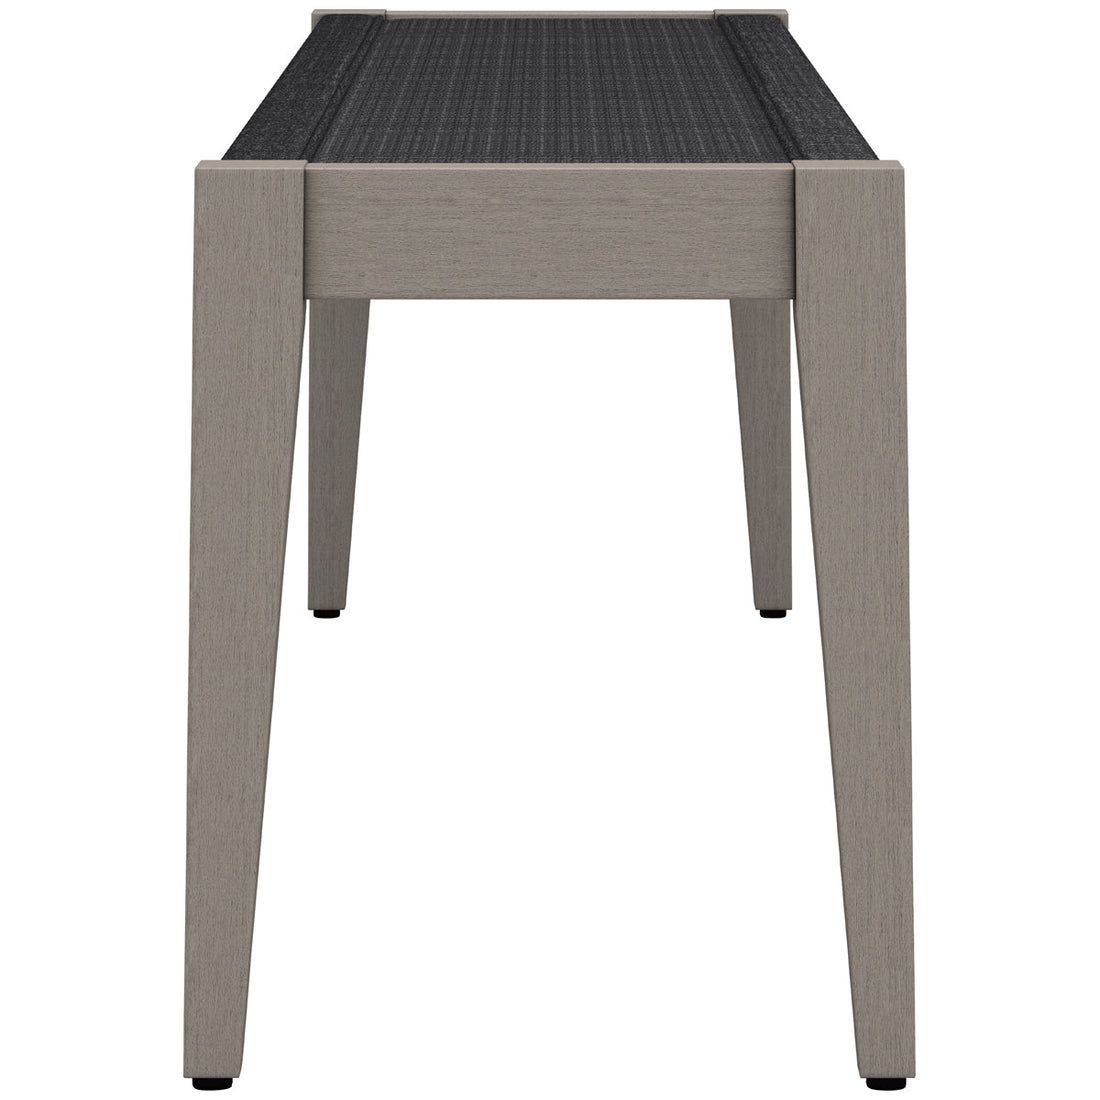 Four Hands Solano Sherwood Outdoor Dining Bench